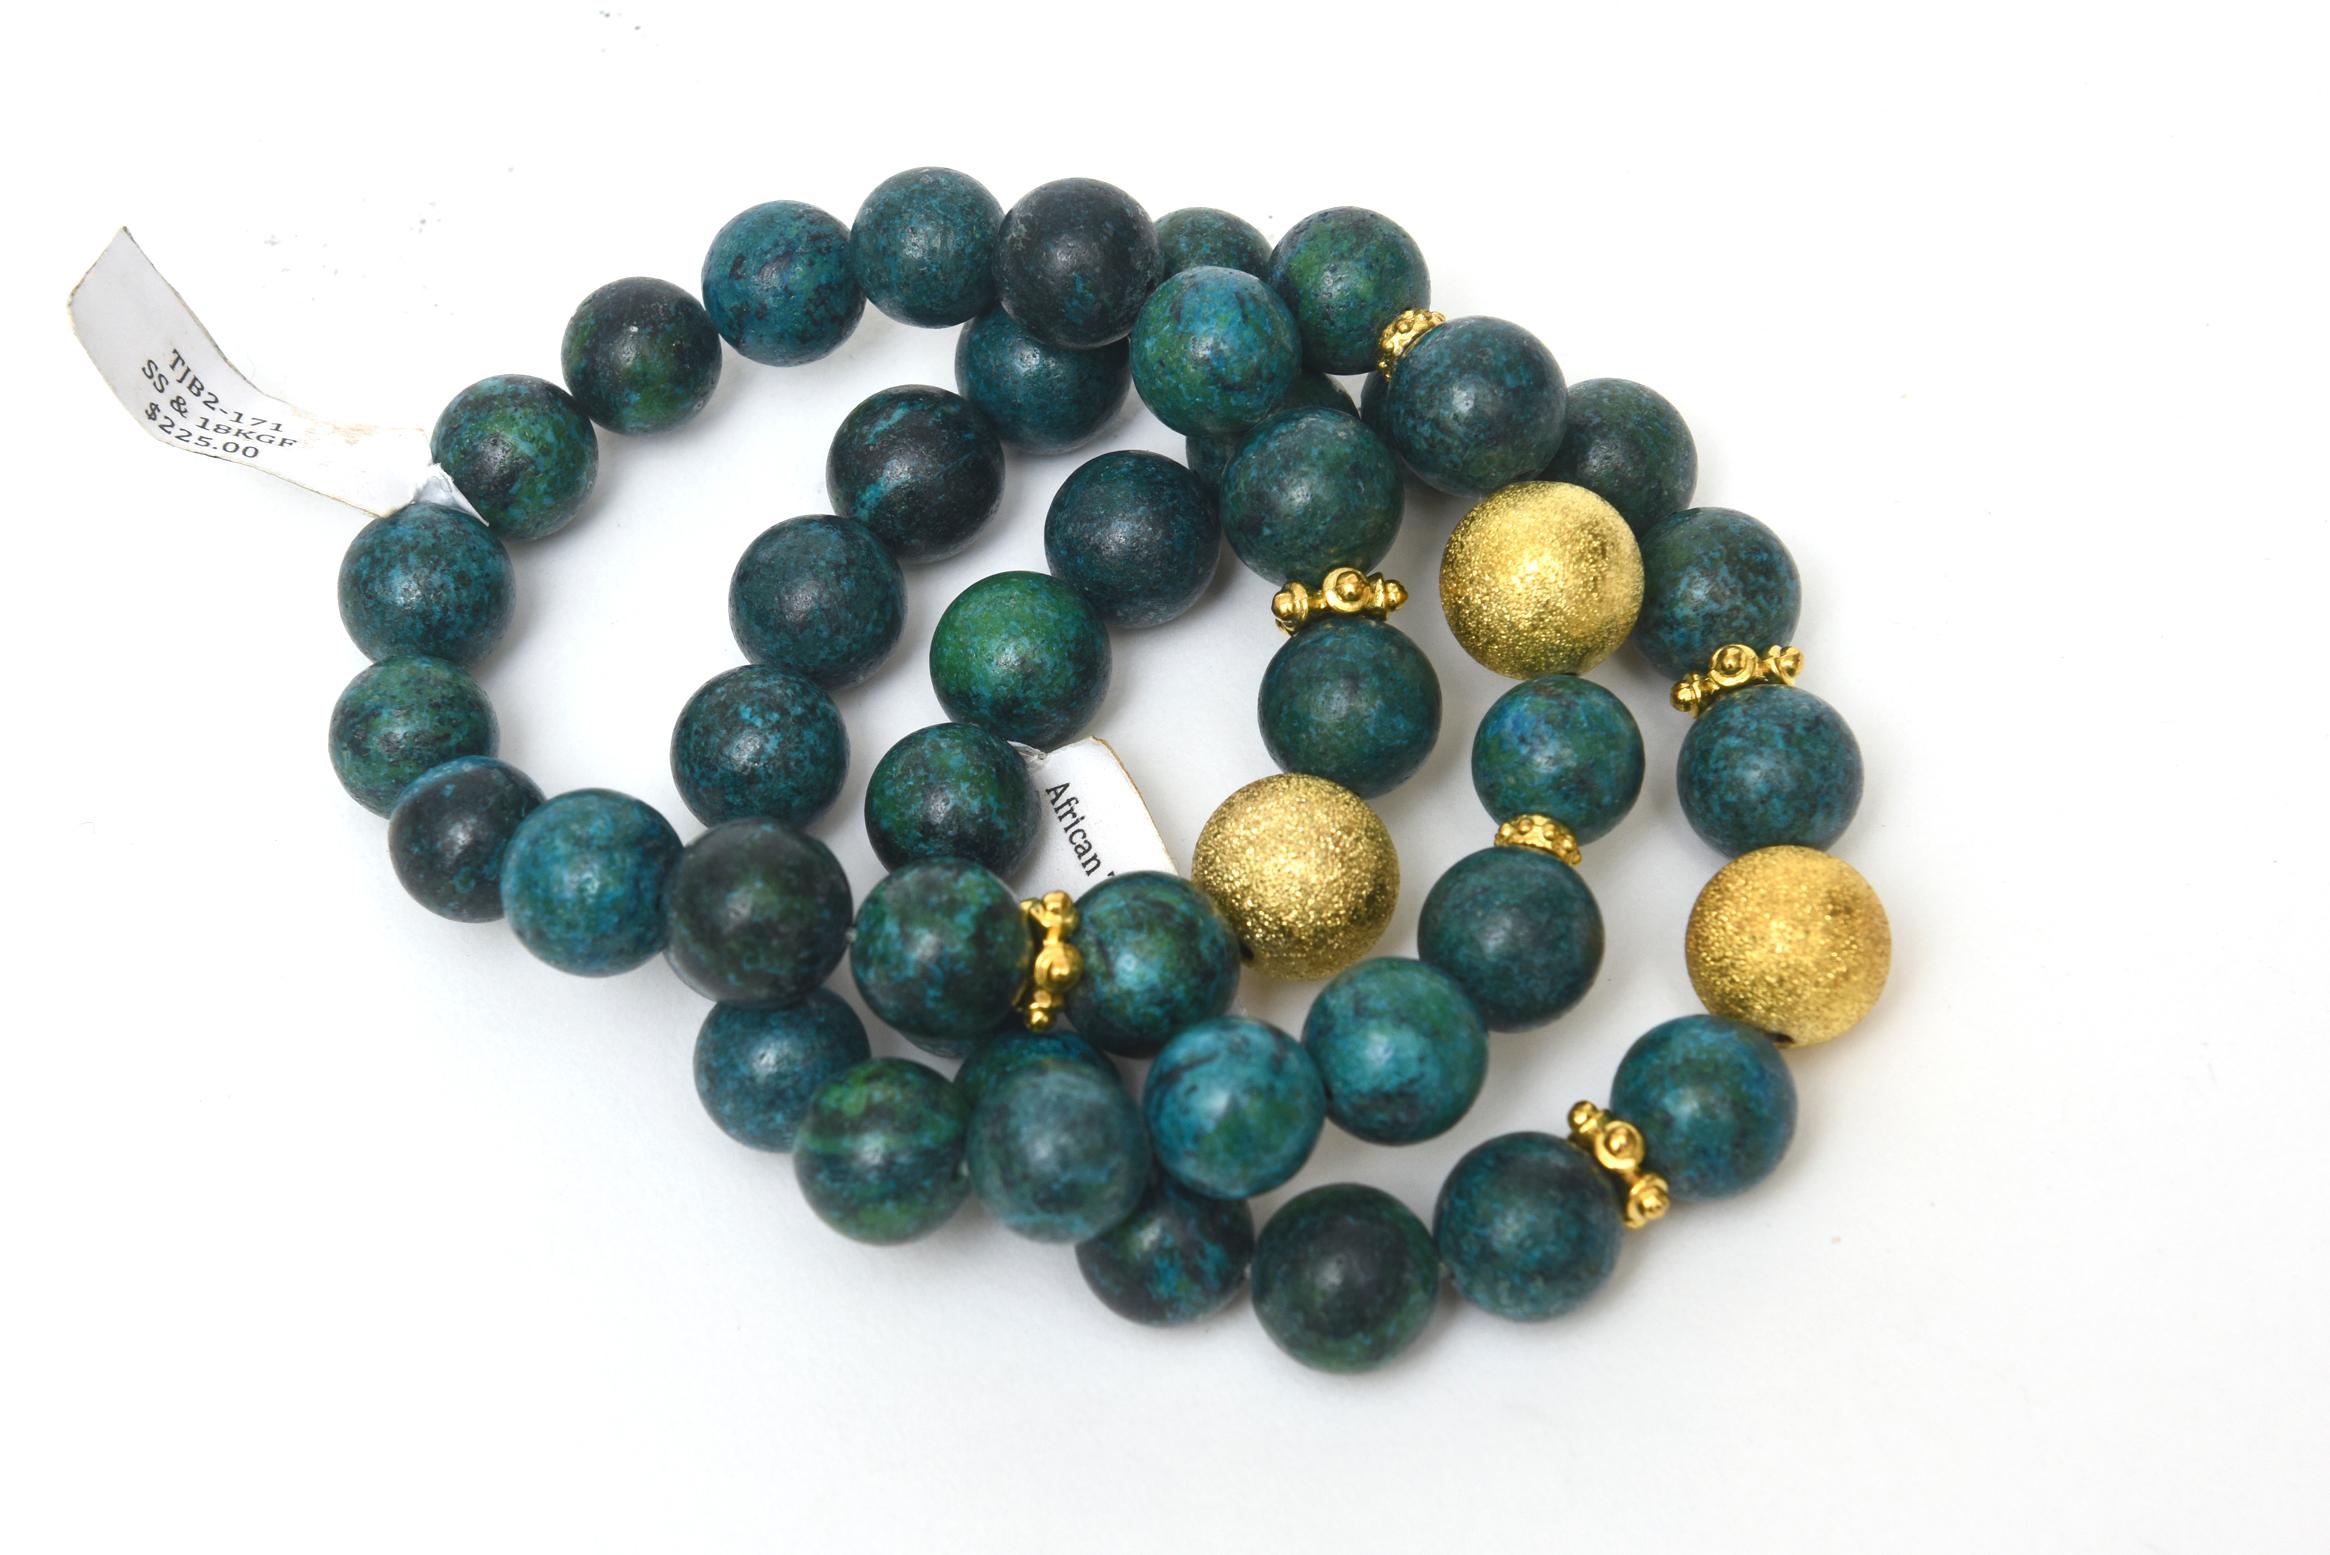 These never worn set of 3 African turquoise beaded bracelets with interspersed gold filled fragments are stretch bracelets with elastic. These were once in a boutique shop on a 5 star cruise but were never sold. They have their original tags on them